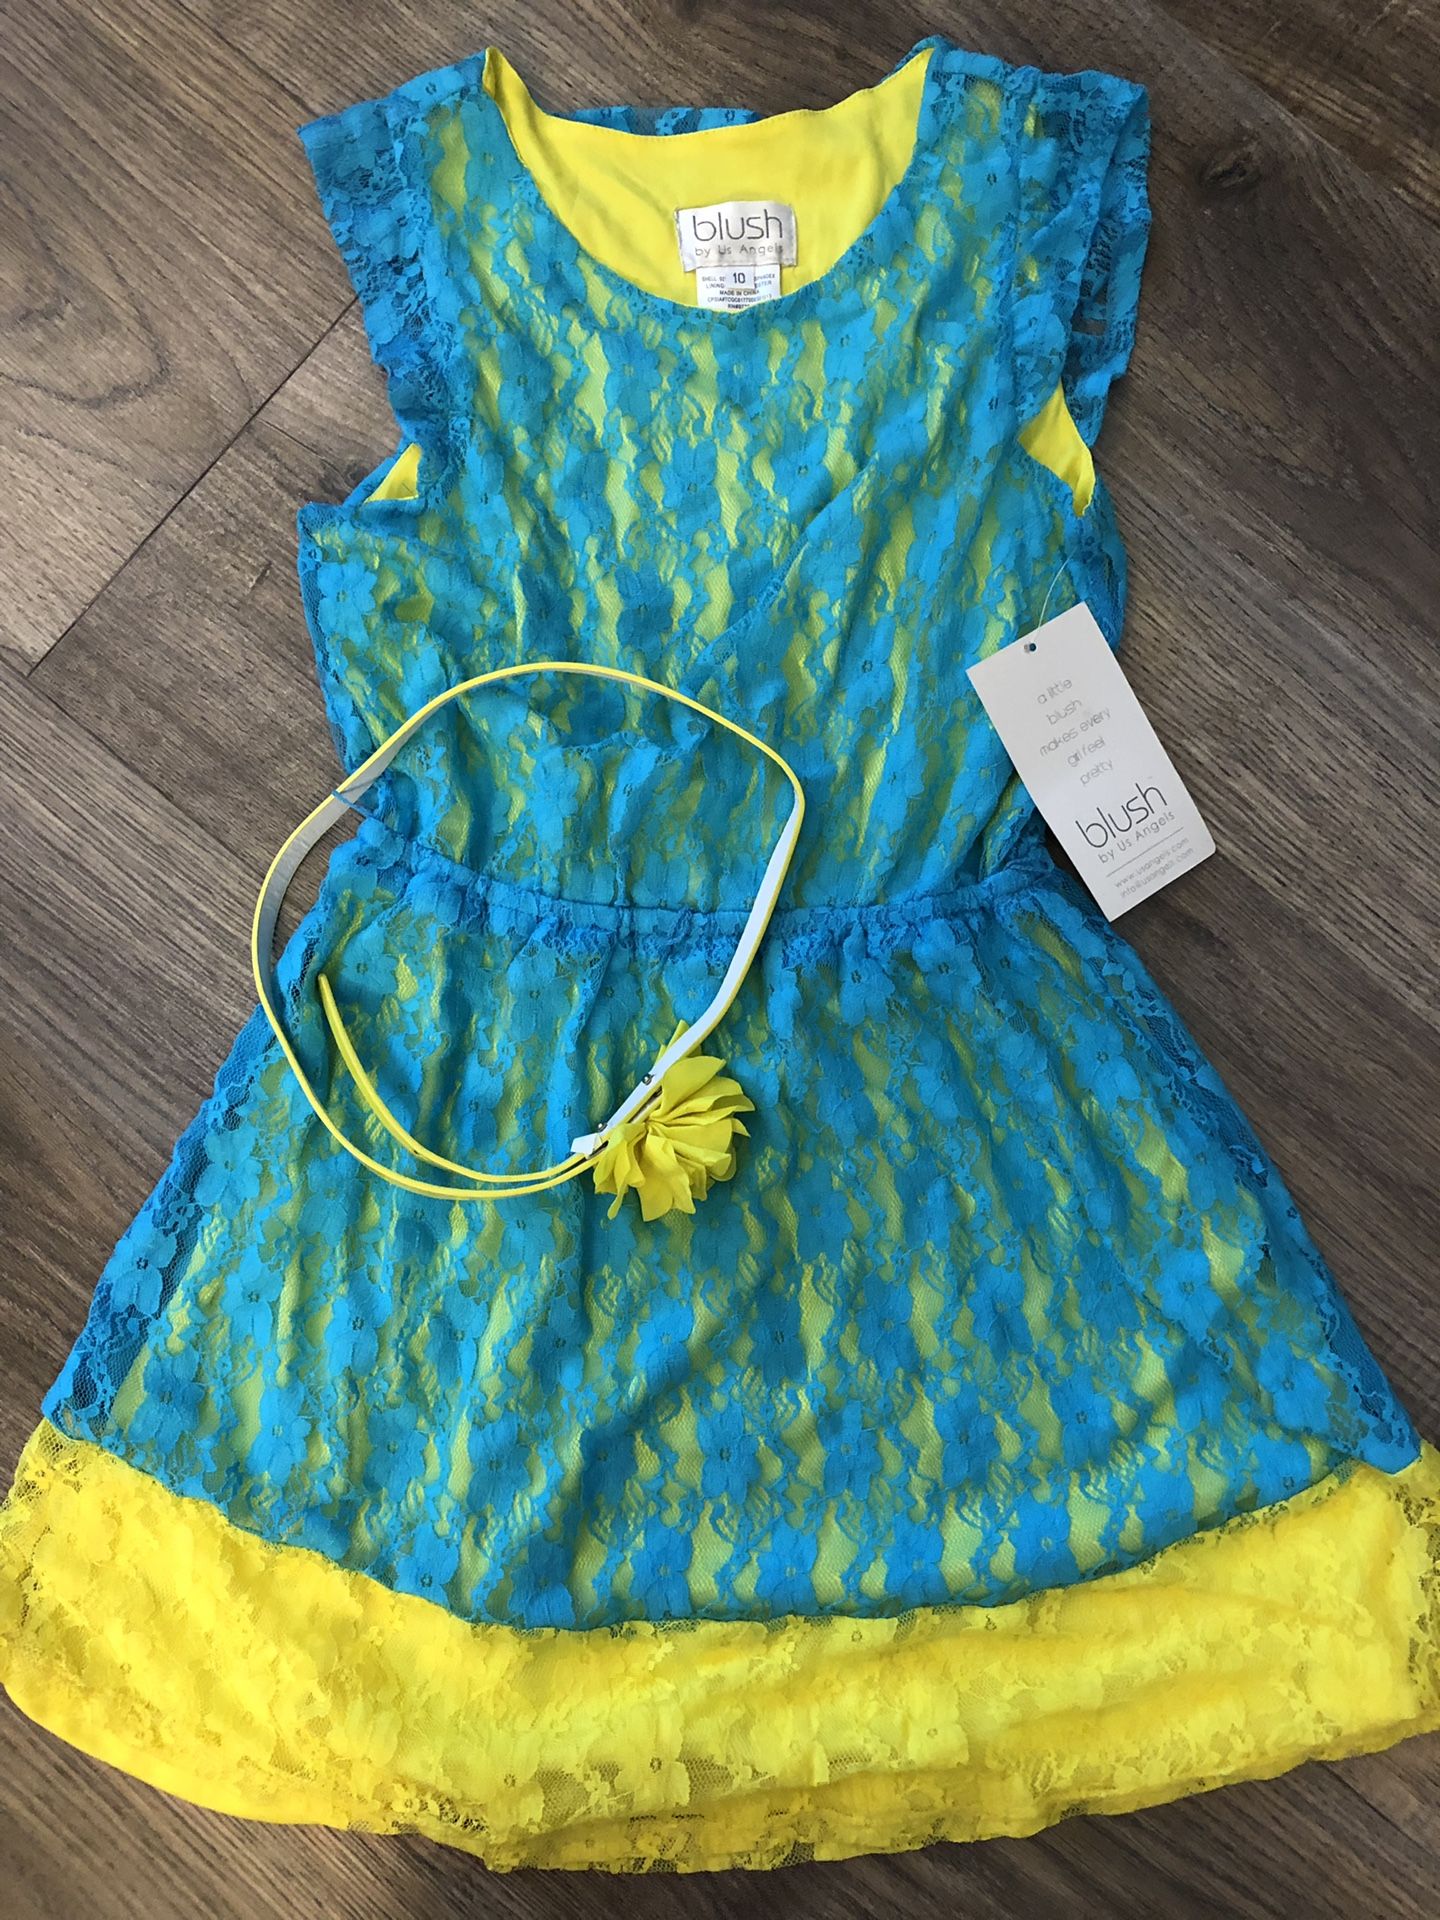 Girls NEW Blue & Yellow Spring Easter Dress sz 10 Blush by Us Angels Brand